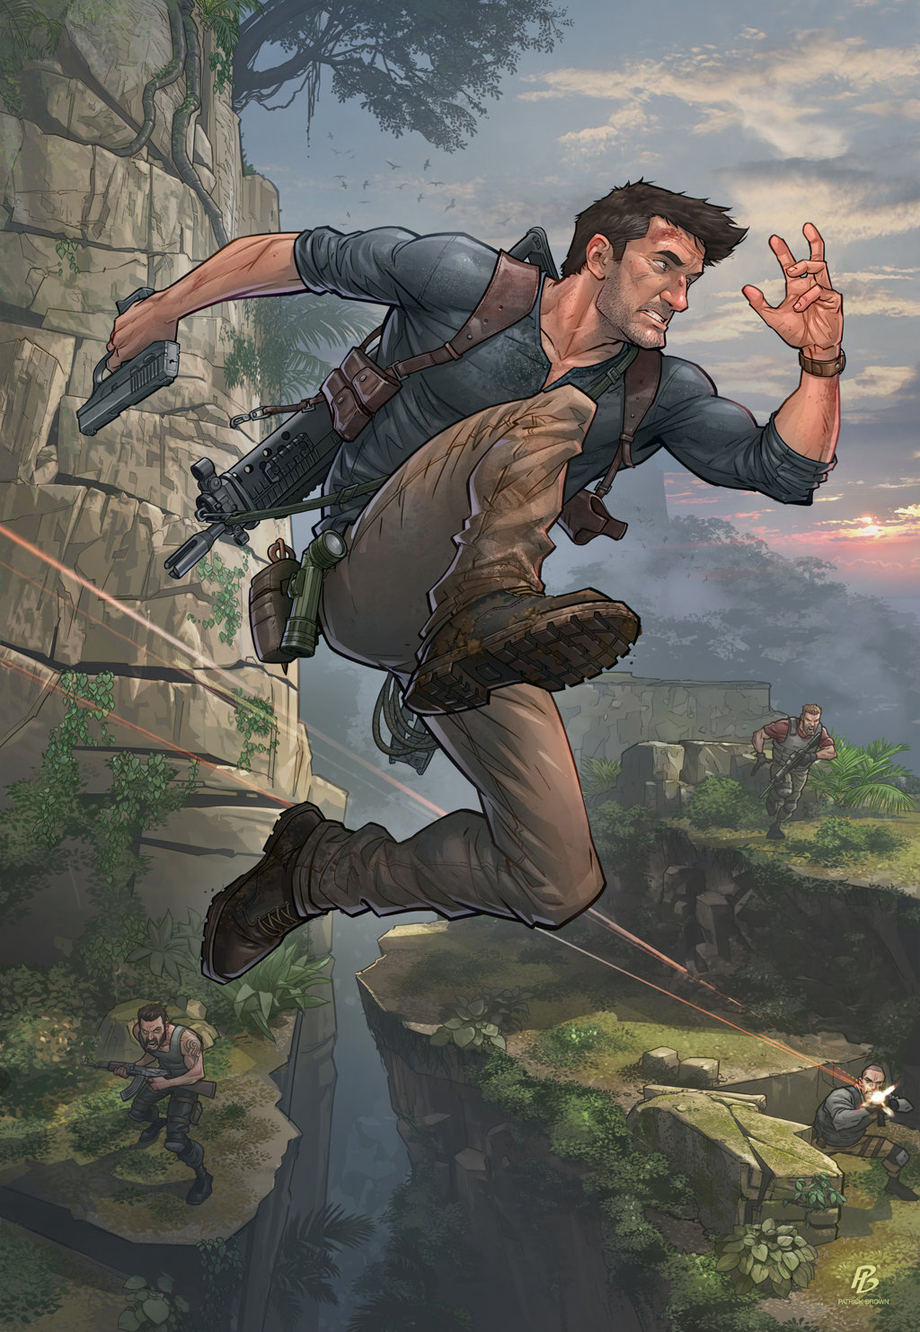 Fantastic-Uncharted-4-fan-art-based-off-of-the-15-minute-gameplay-trailer.jpg